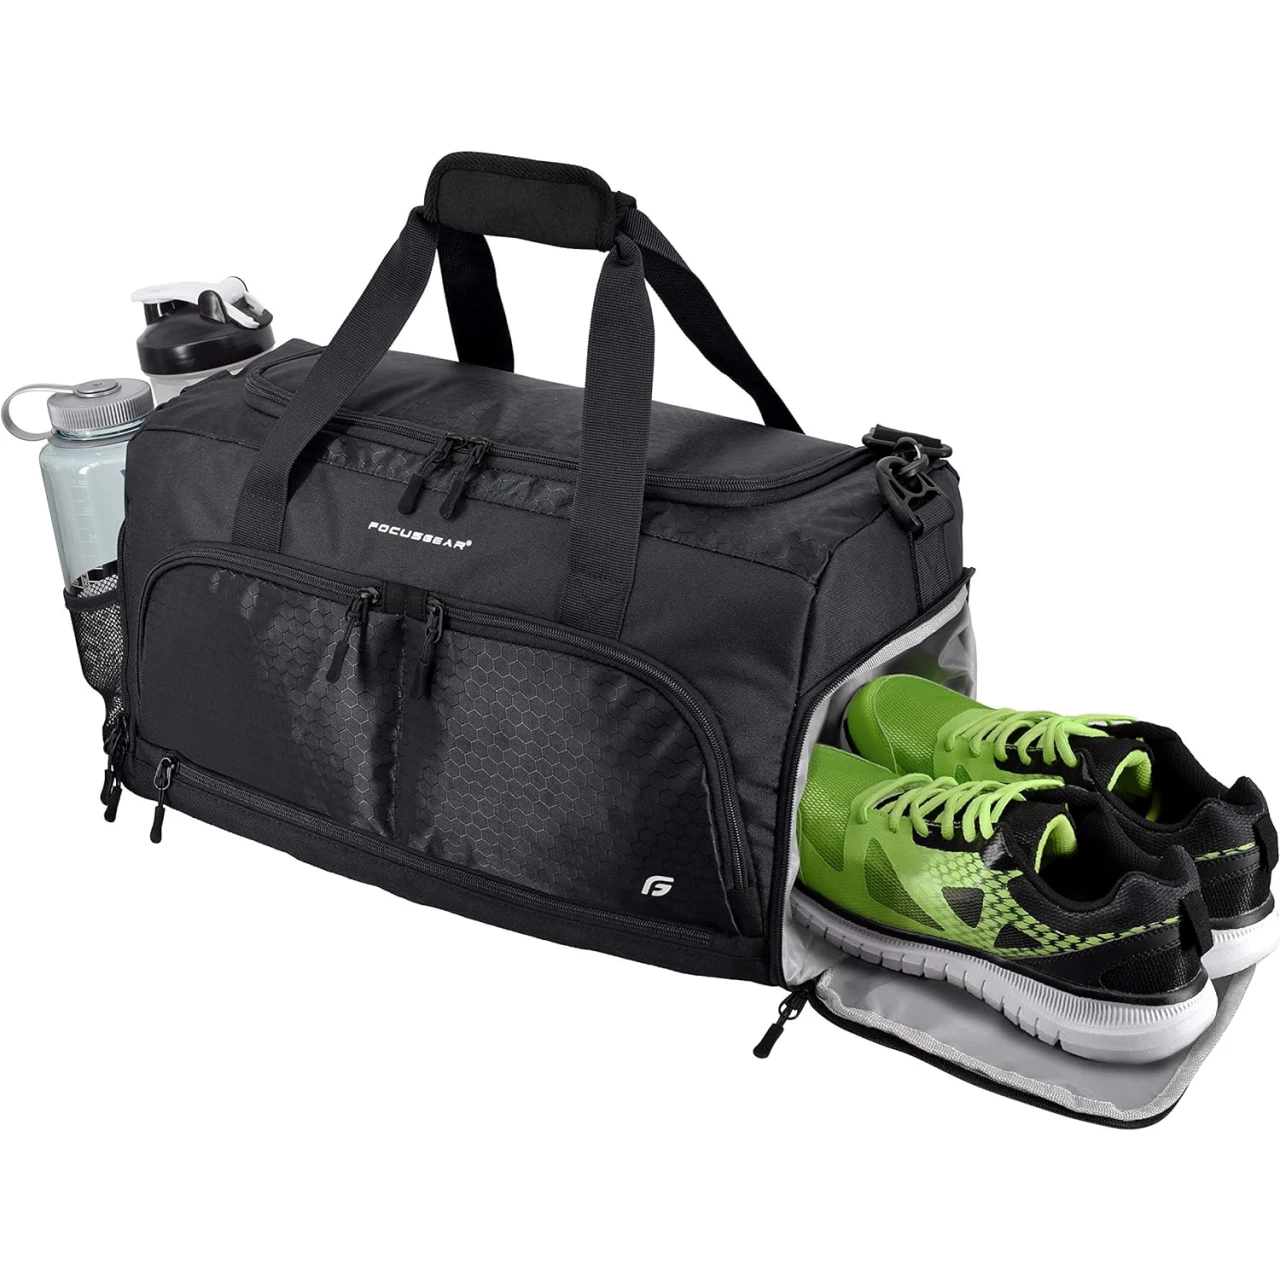 Ultimate Gym Bag 2.0: The Durable Duffel Bag with 10 Compartments